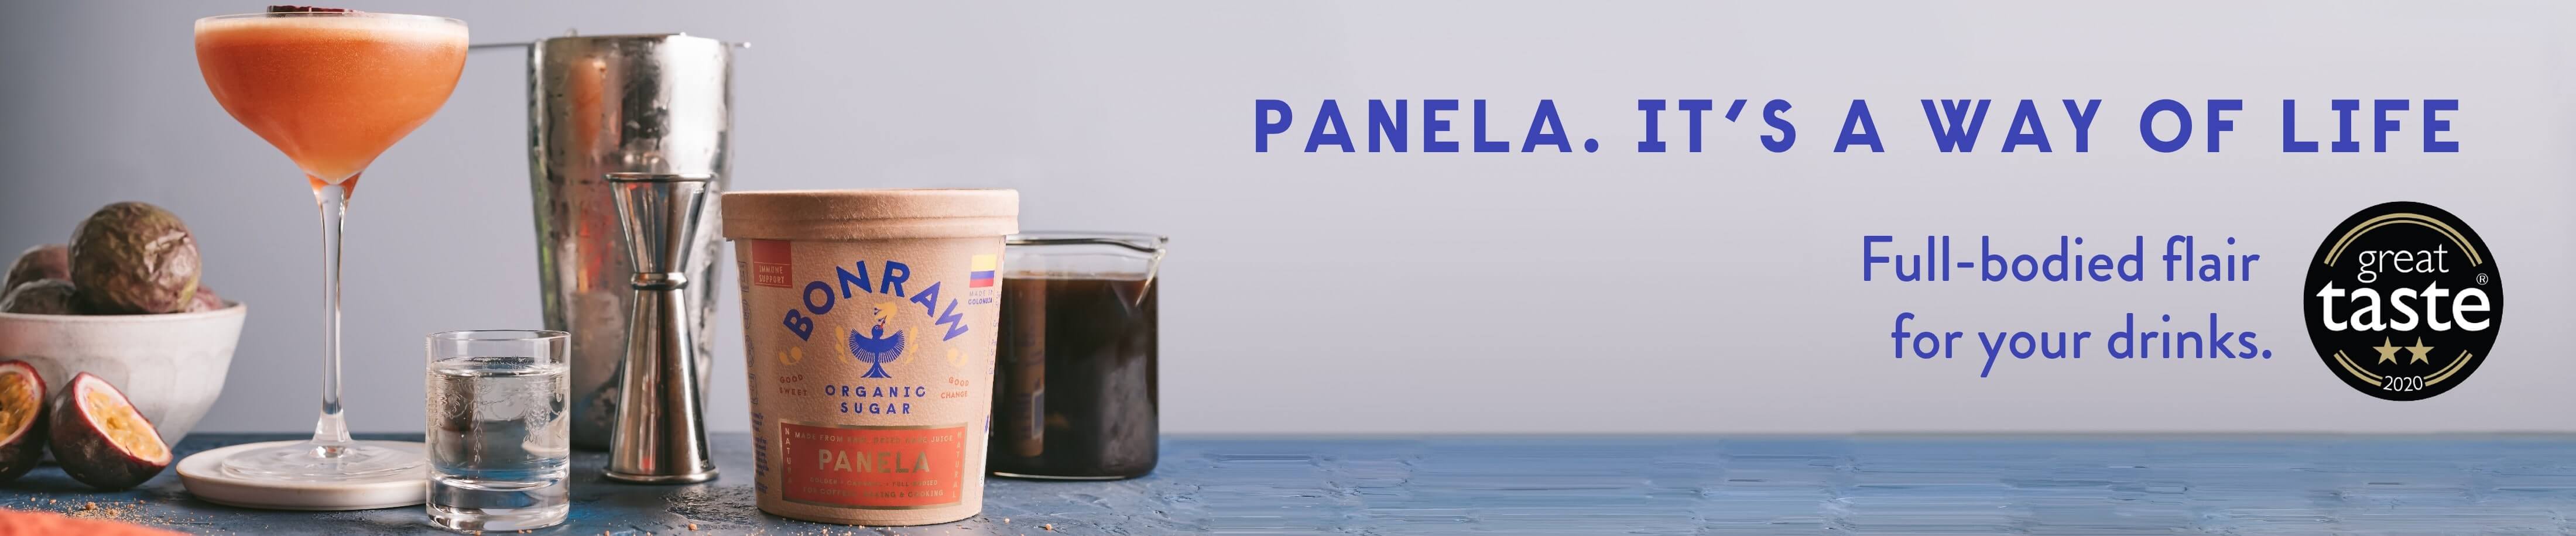 Full - Bodied flair for your drinks, Panela its the way of life . great taste 2 star 2020.